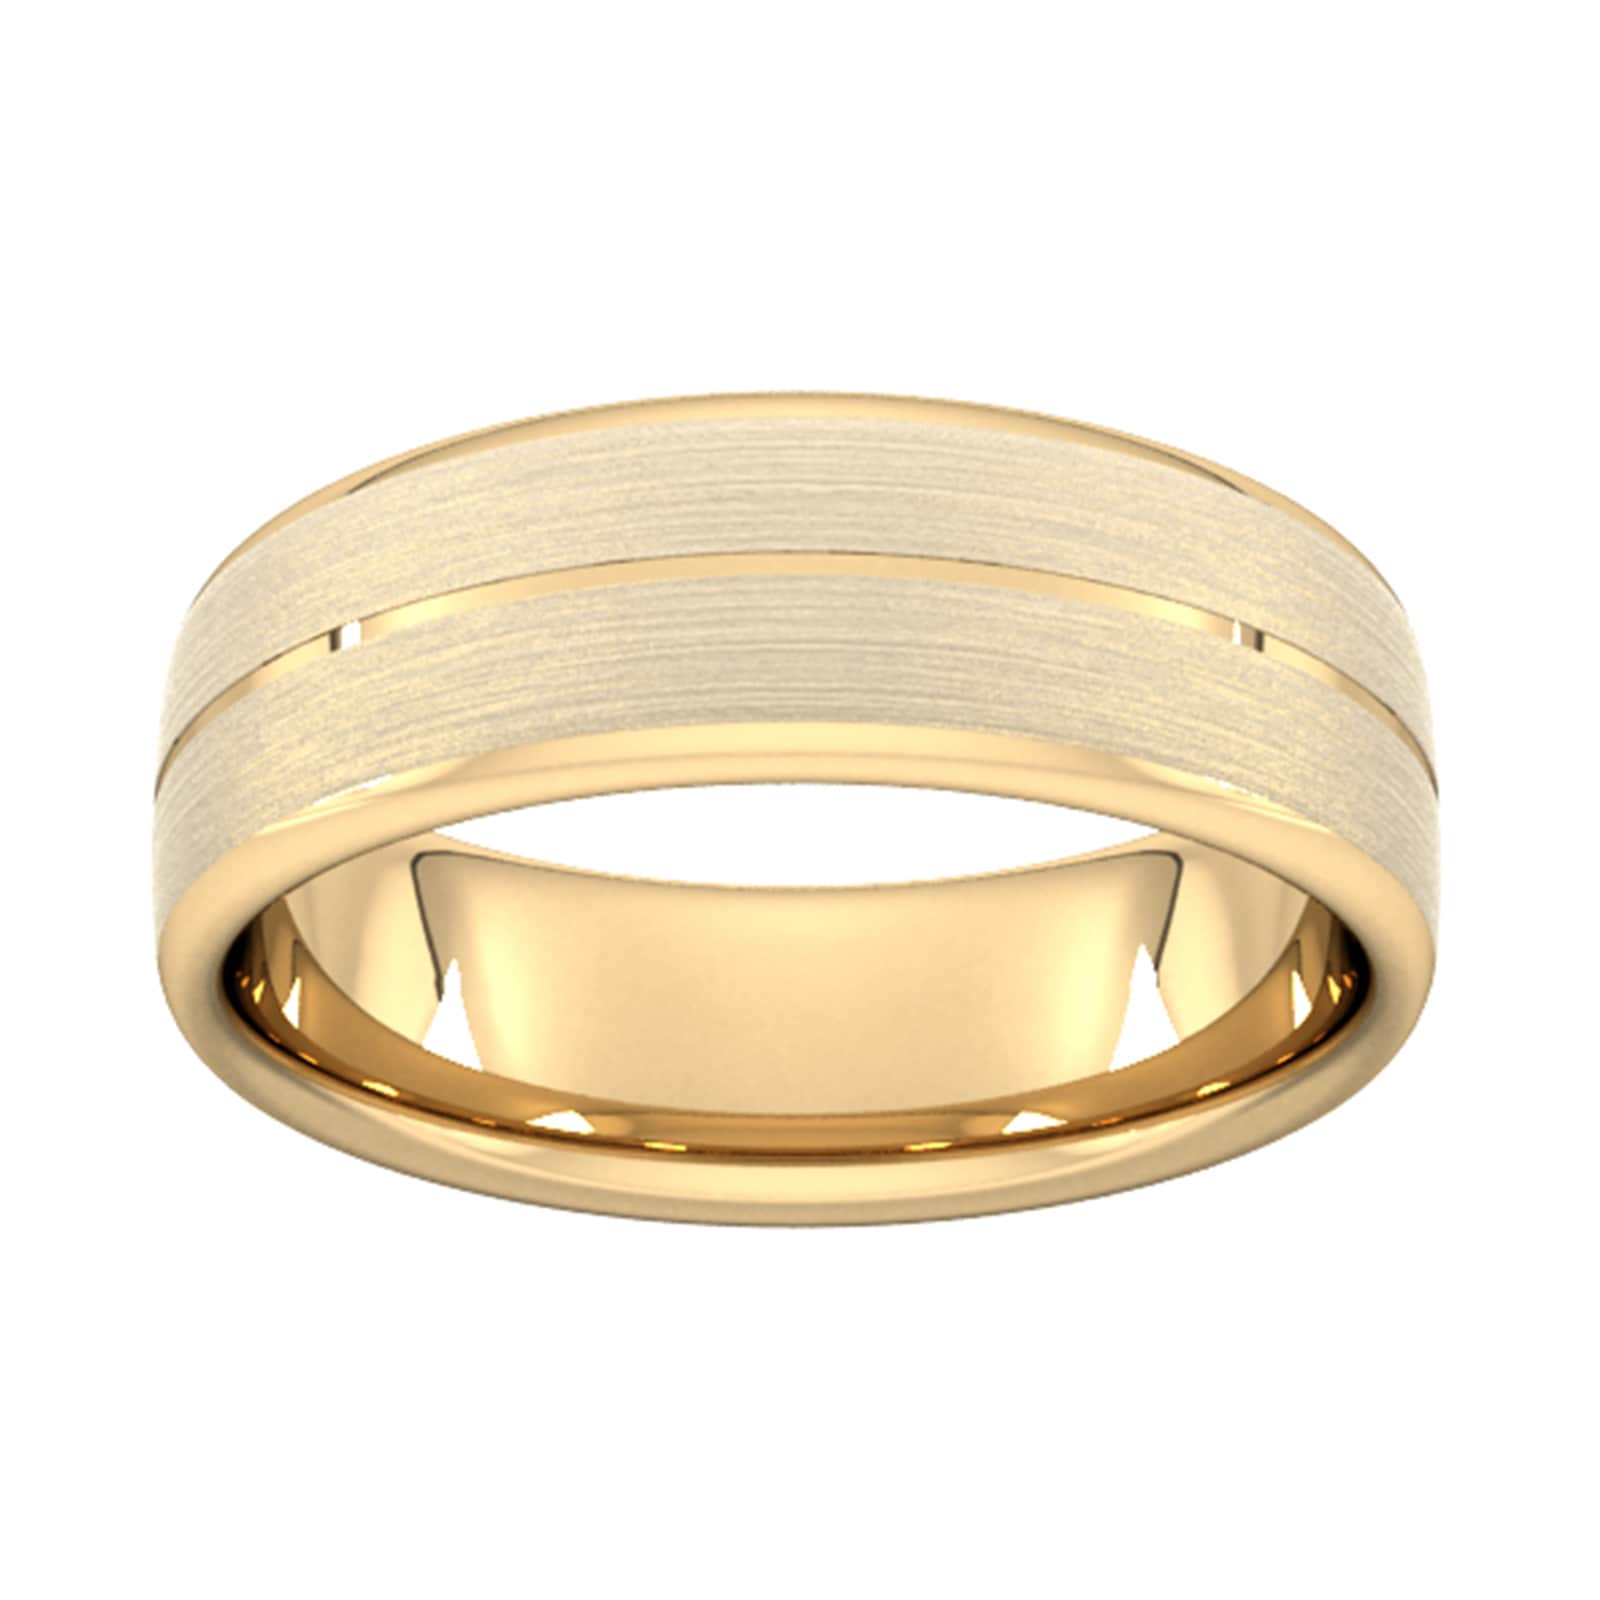 7mm Slight Court Extra Heavy Centre Groove With Chamfered Edge Wedding Ring In 9 Carat Yellow Gold - Ring Size L